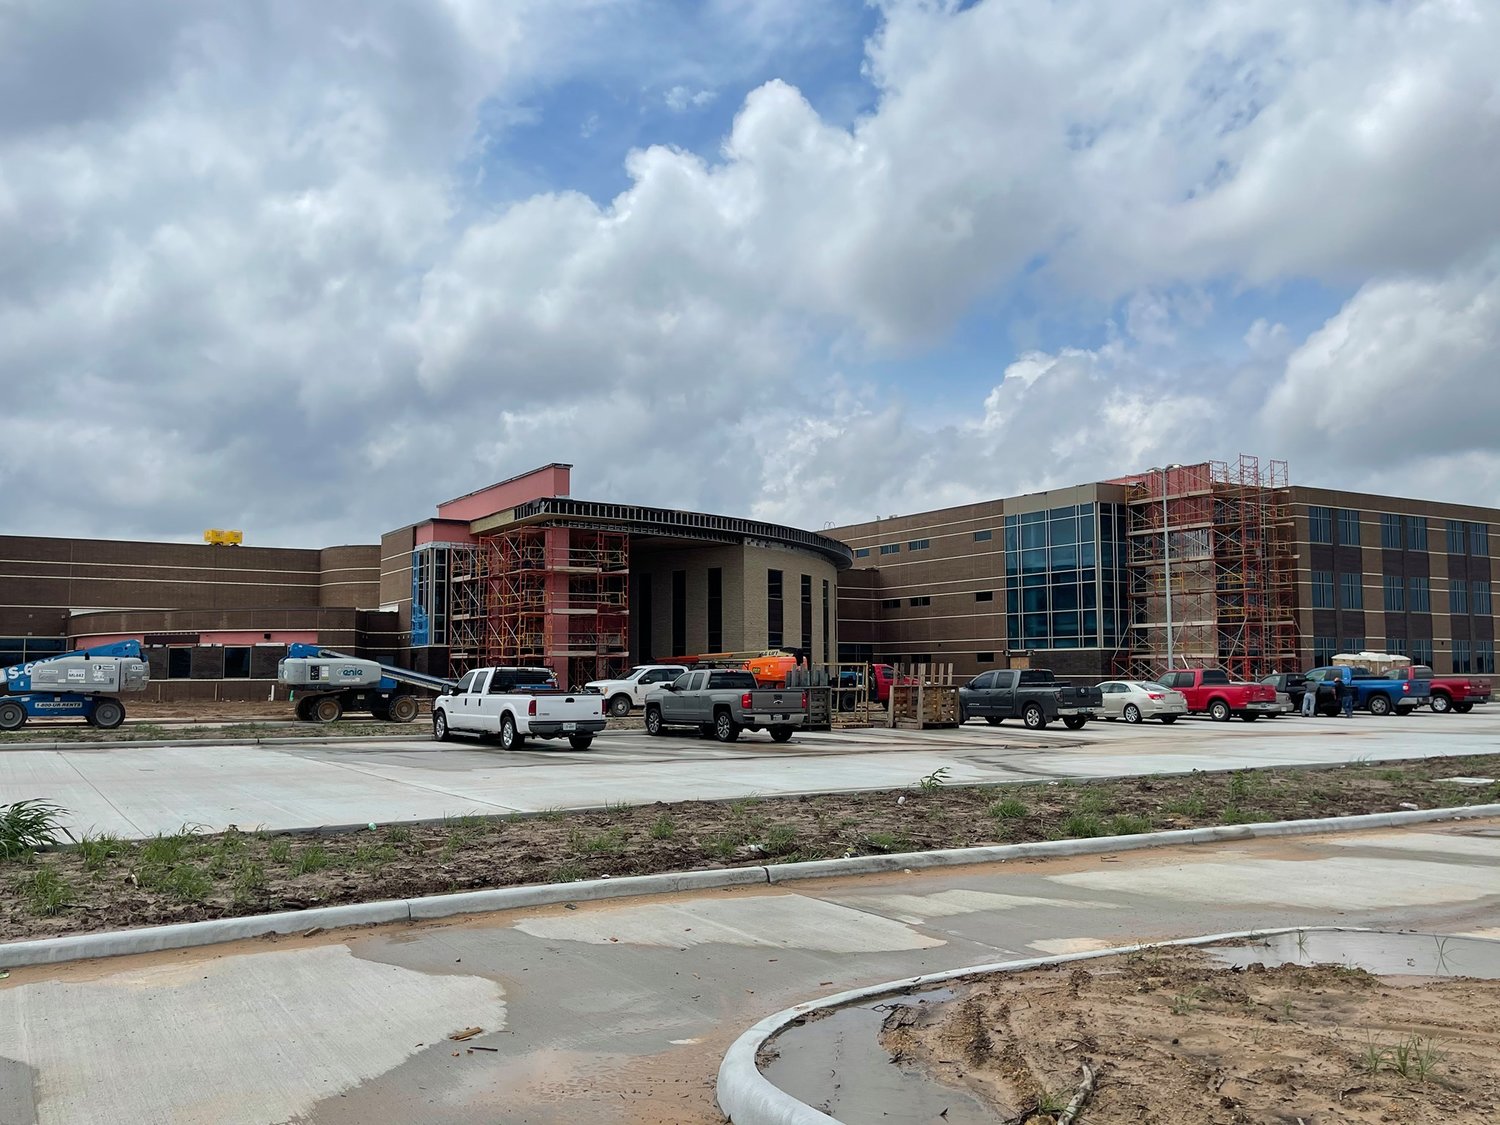 The exterior of Haskett Junior High School is nearly completed with workers putting on the last finishing touches. Sporting fields will be associated to the western side of the main campus building. Landscaping will be completed as construction gets closer to completion.